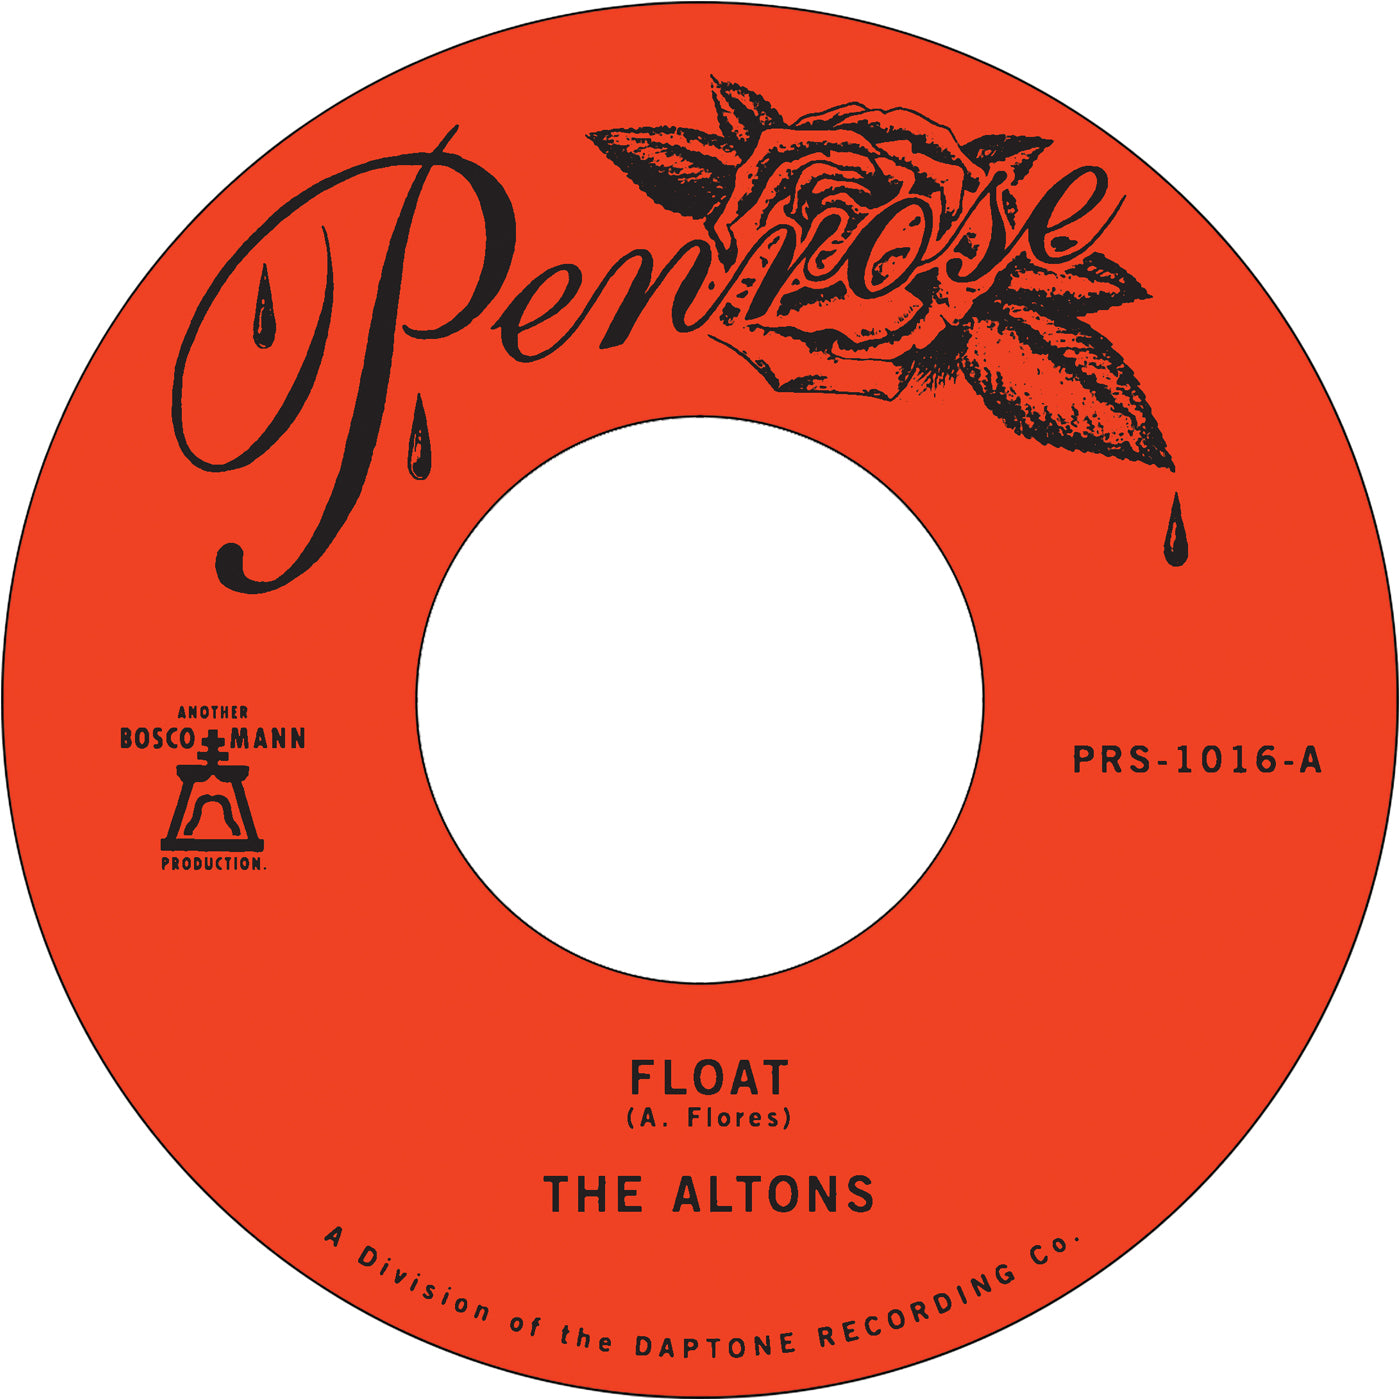 The Altons - "Float" / "Cry For Me" 45